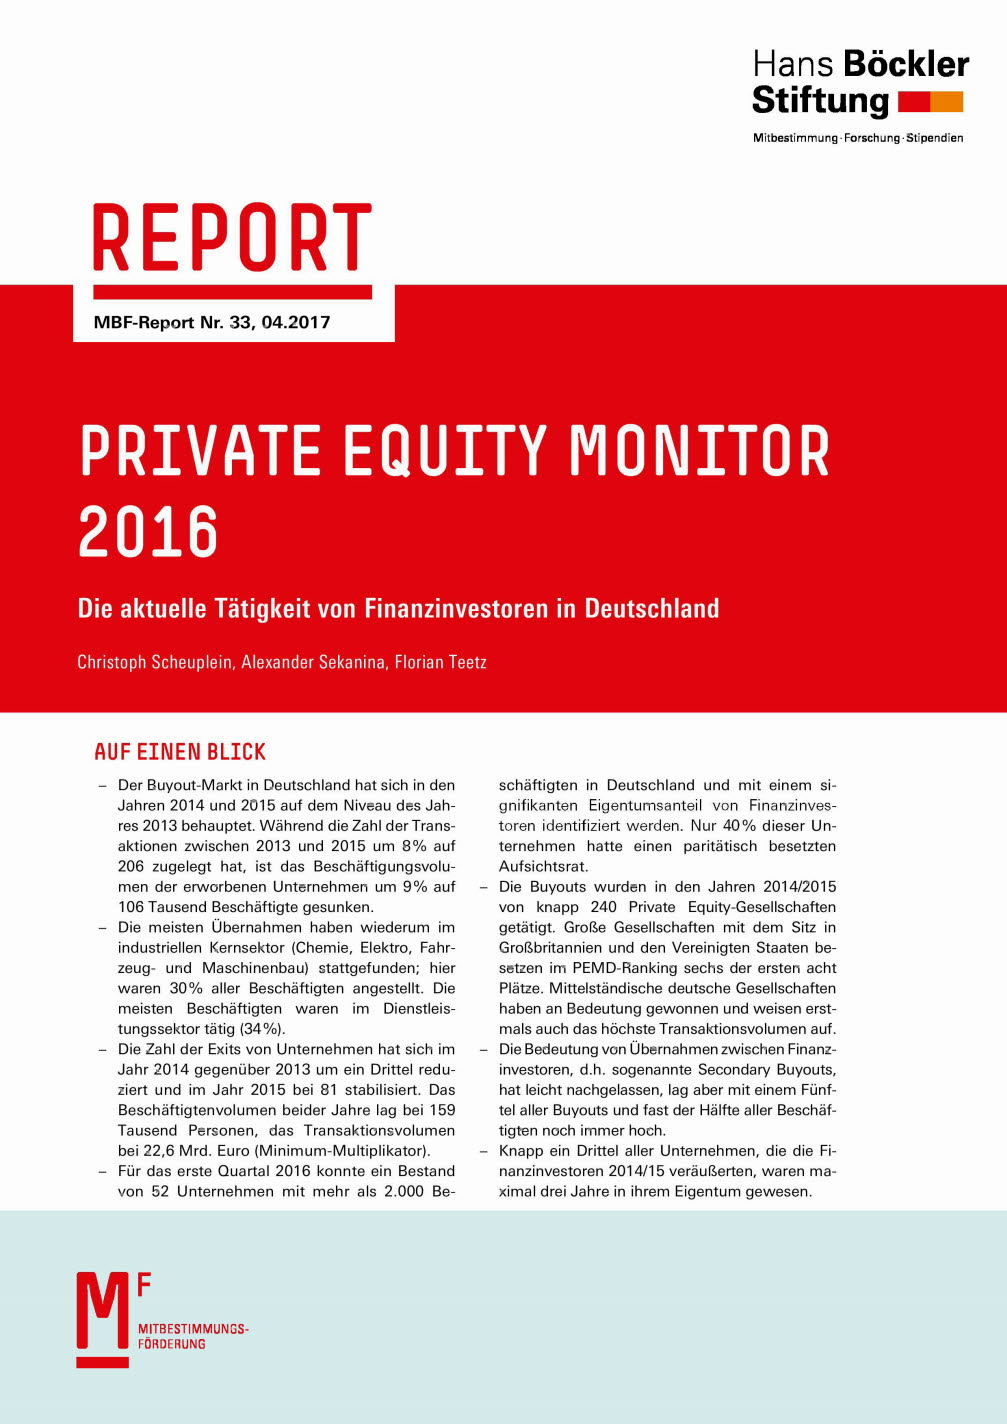 Private Equity Monitor 2016